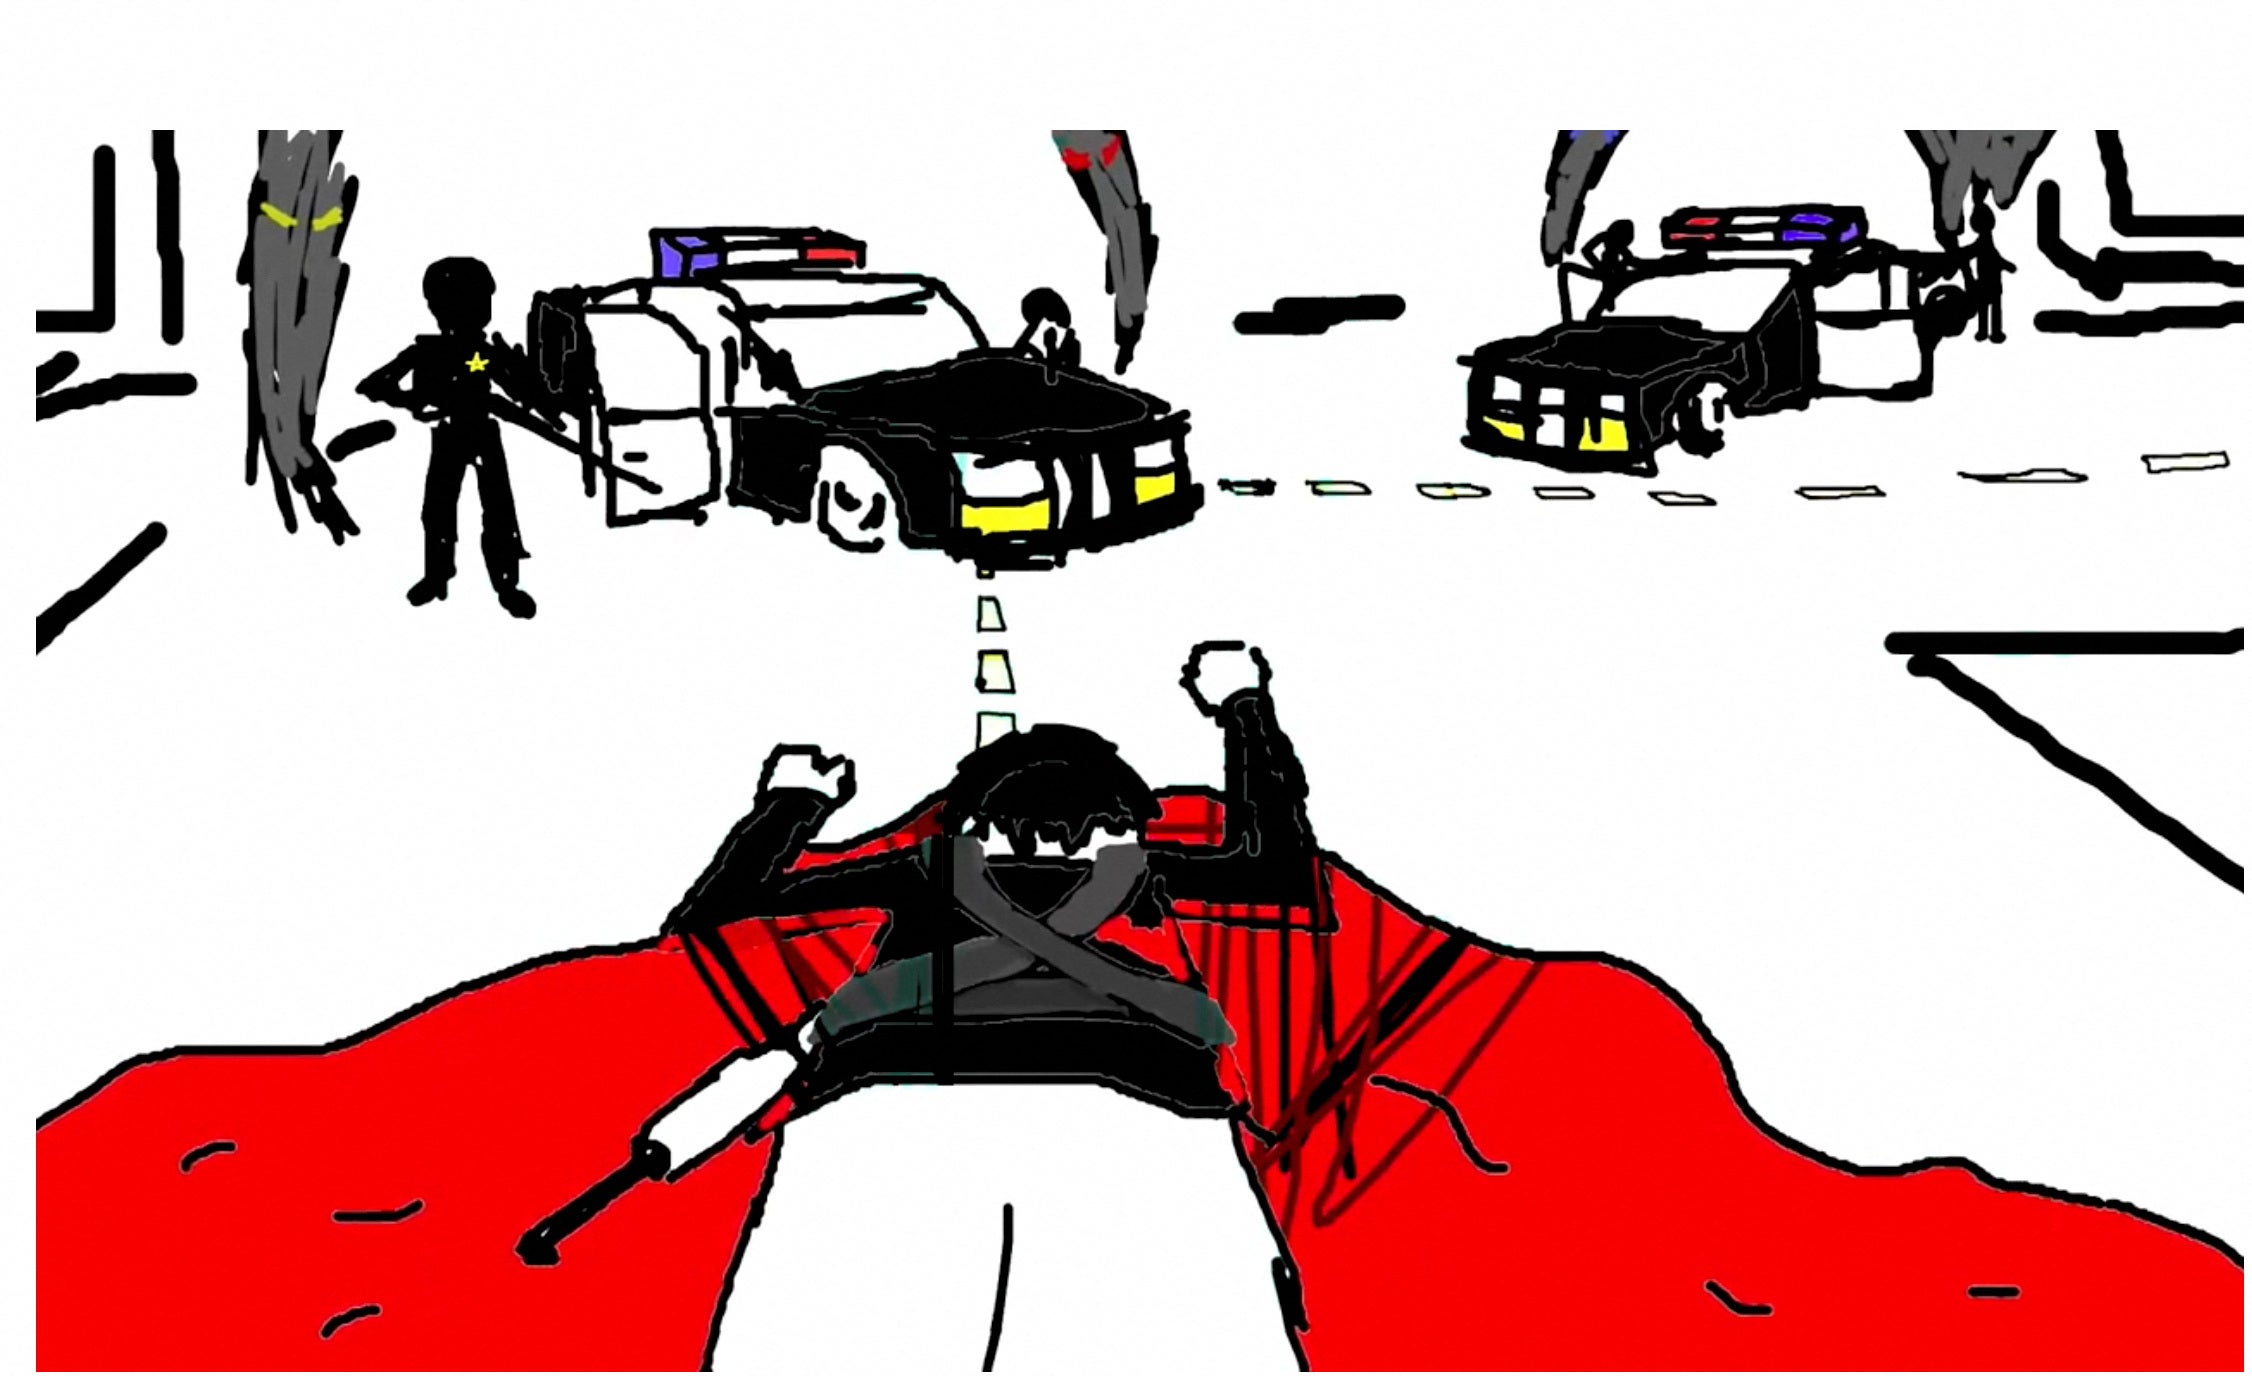 In an animated video the character resembling Robert Crimo is seen lying dead in a pool of blood surrounded by heavily armed law enforcement